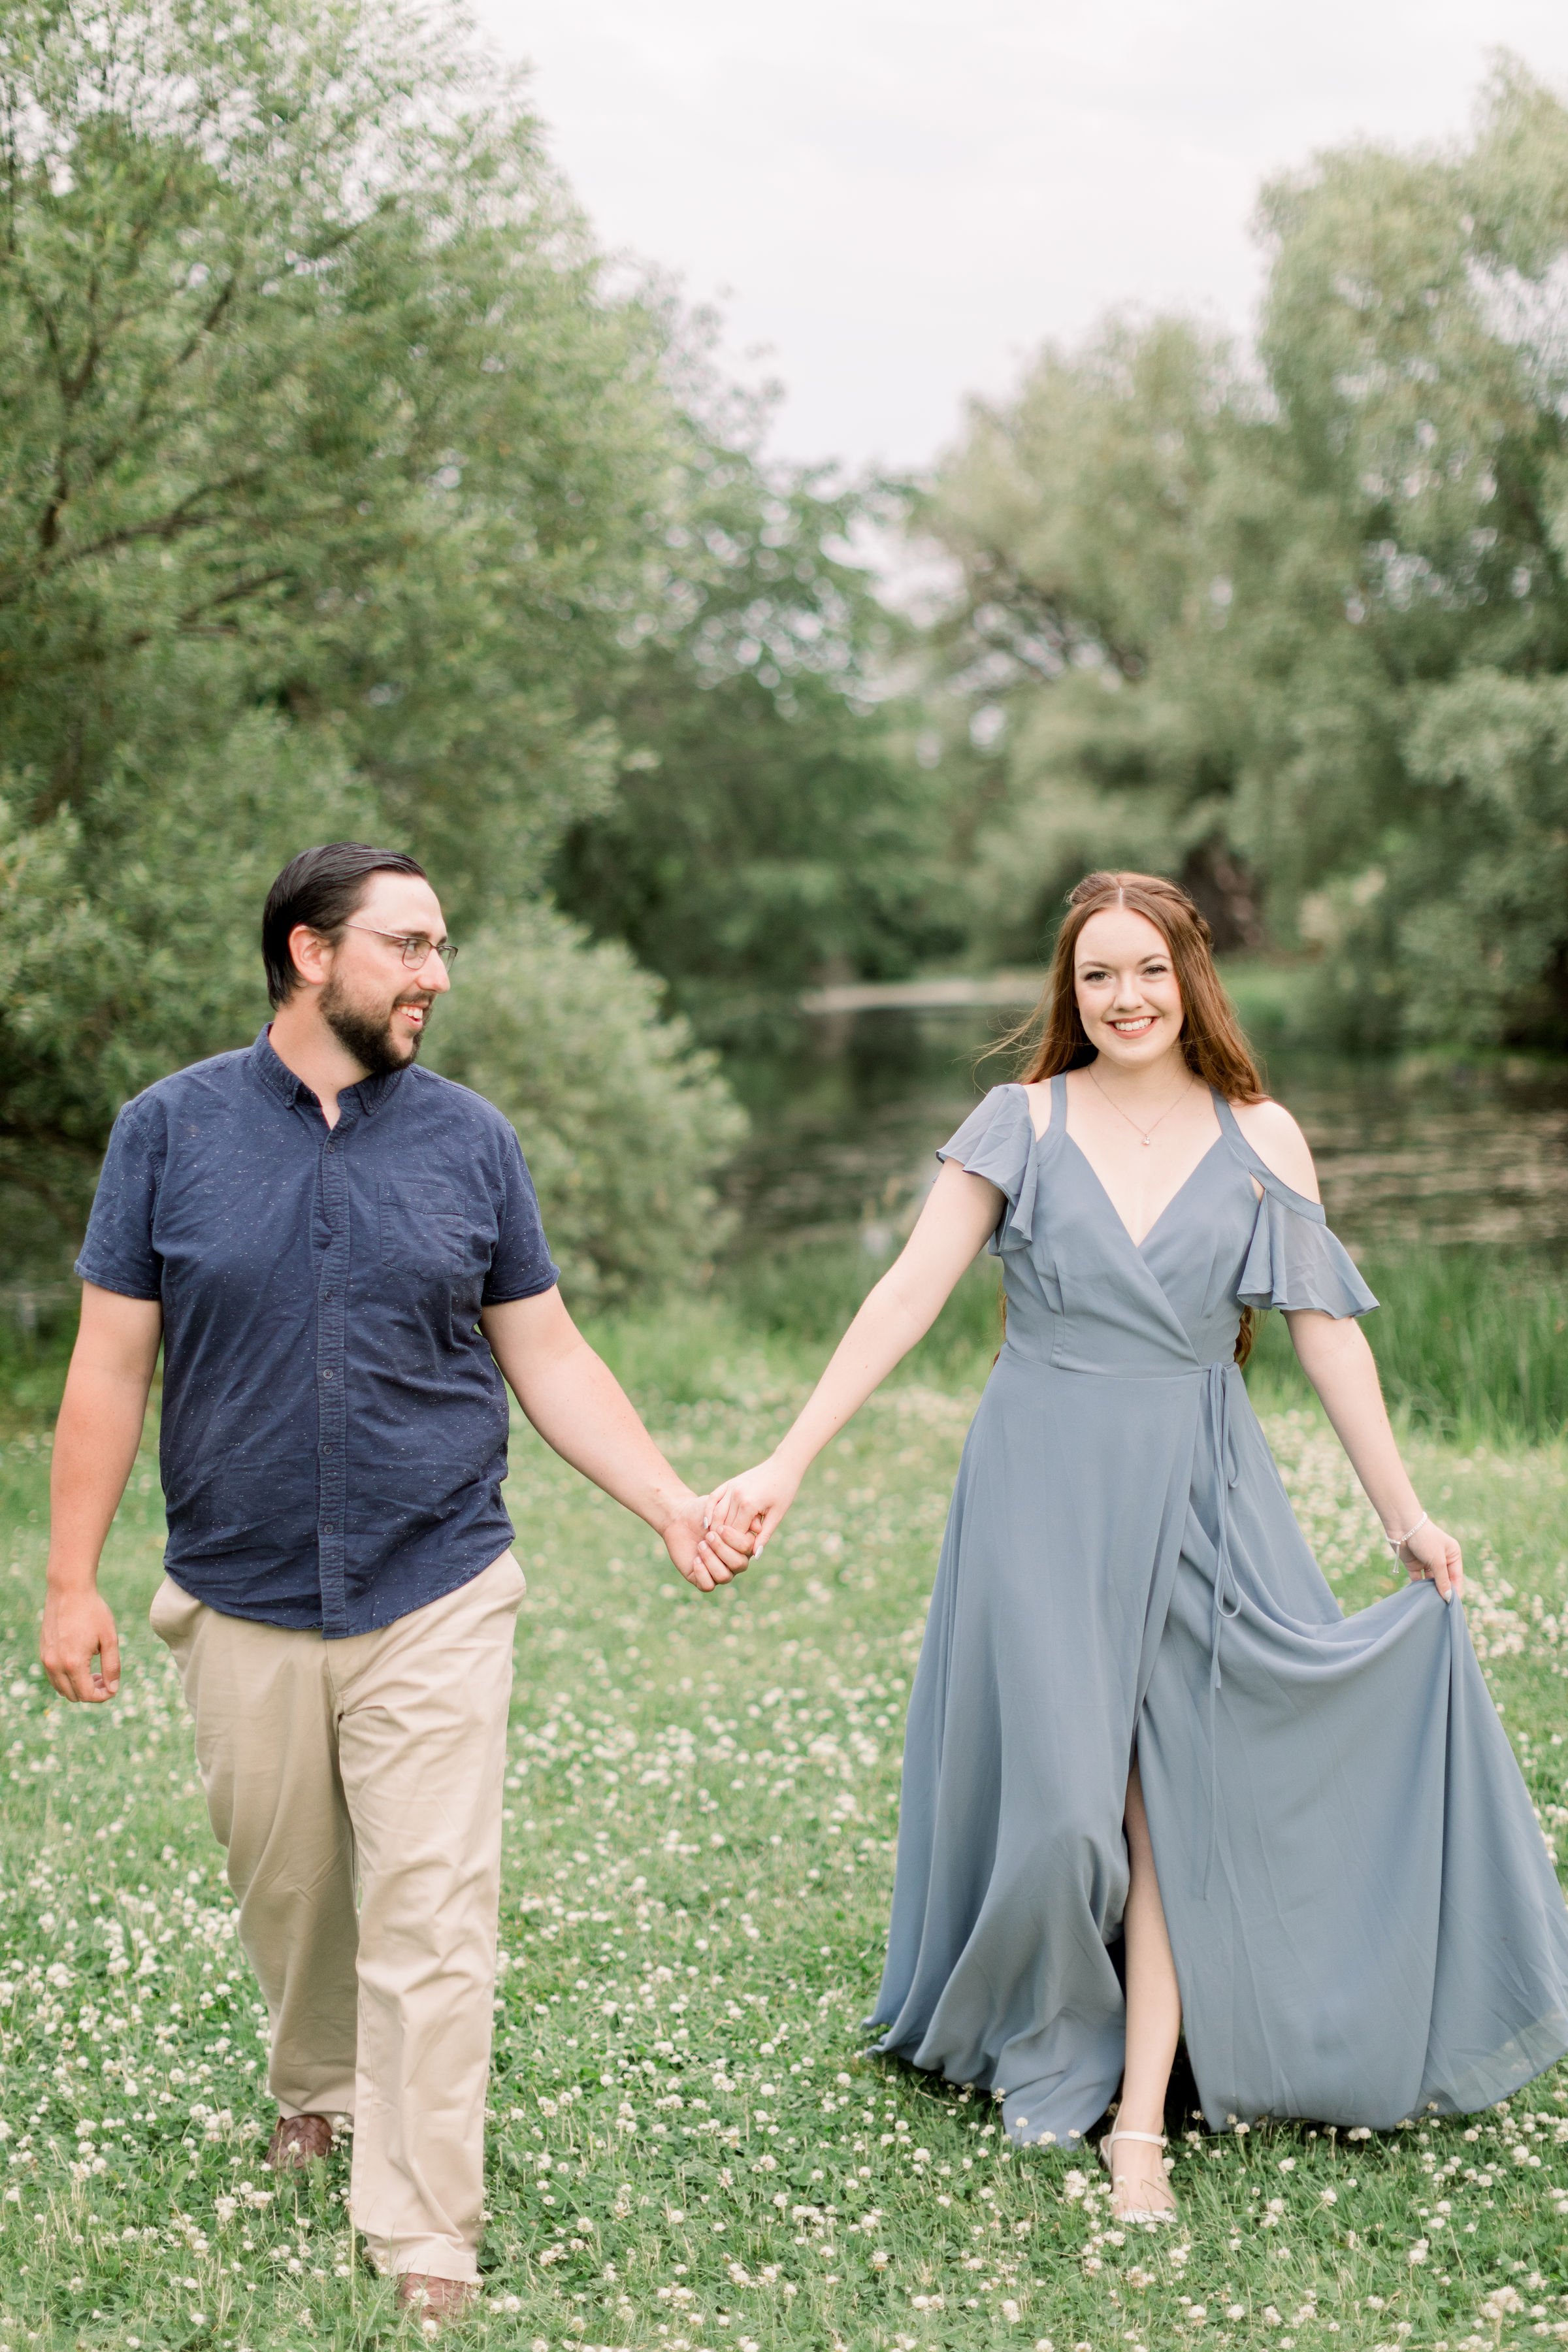  A red-haired woman in a blue dress smiles during an engagement session with Chelsea Mason Photography. engagement style ideas red hair #chelseamasonphotography #chelseamasonengagements #Ottawaengagements #DominonArboretum #Ottawaphotographers 